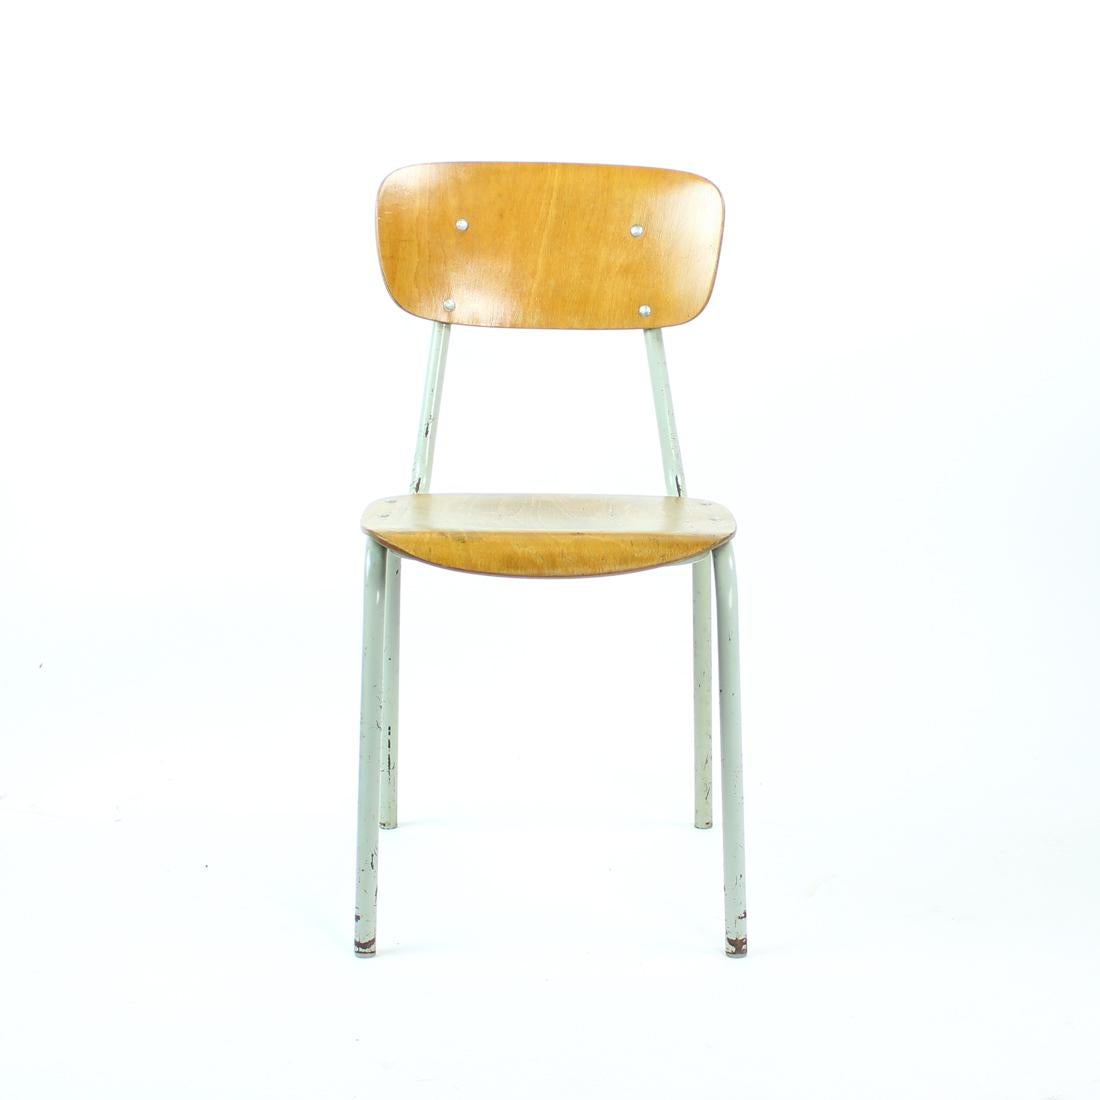 Mid-Century Modern School Chair In Metal And Plywood, Kovona, Czechoslovakia 1960s For Sale